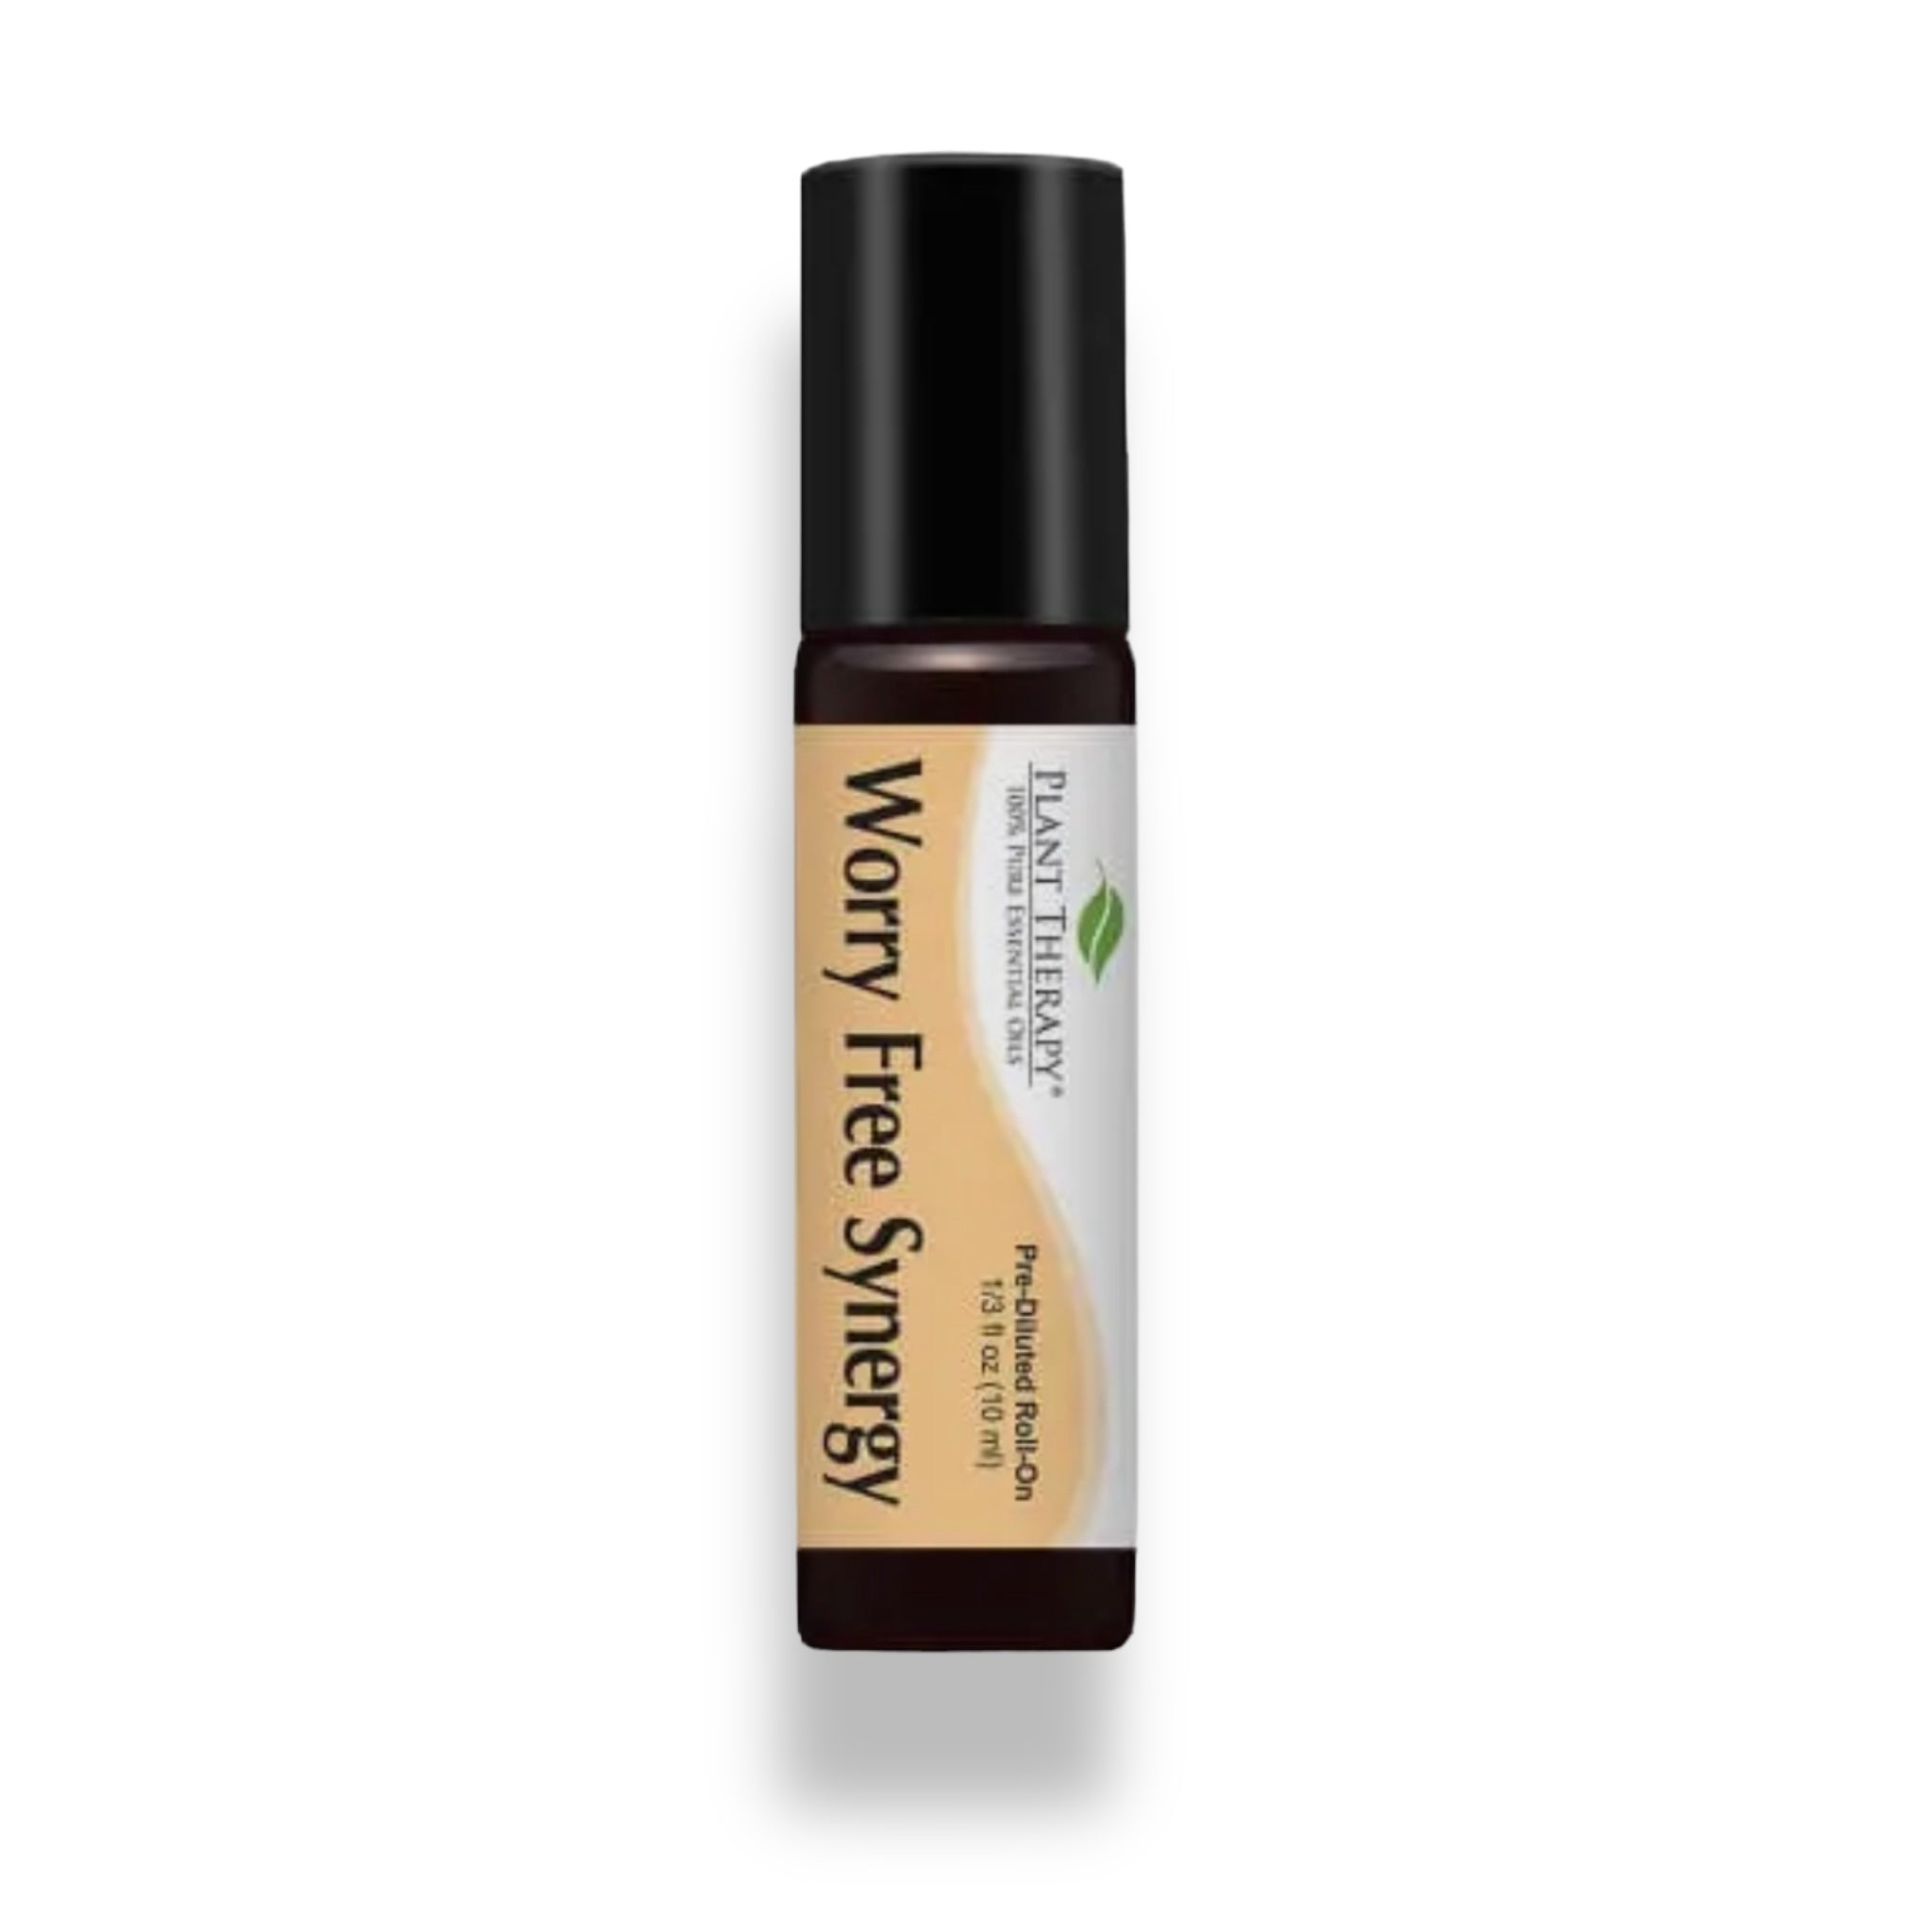 Aromatherapy Essential Oil Roll-on WORRY FREE Synergy